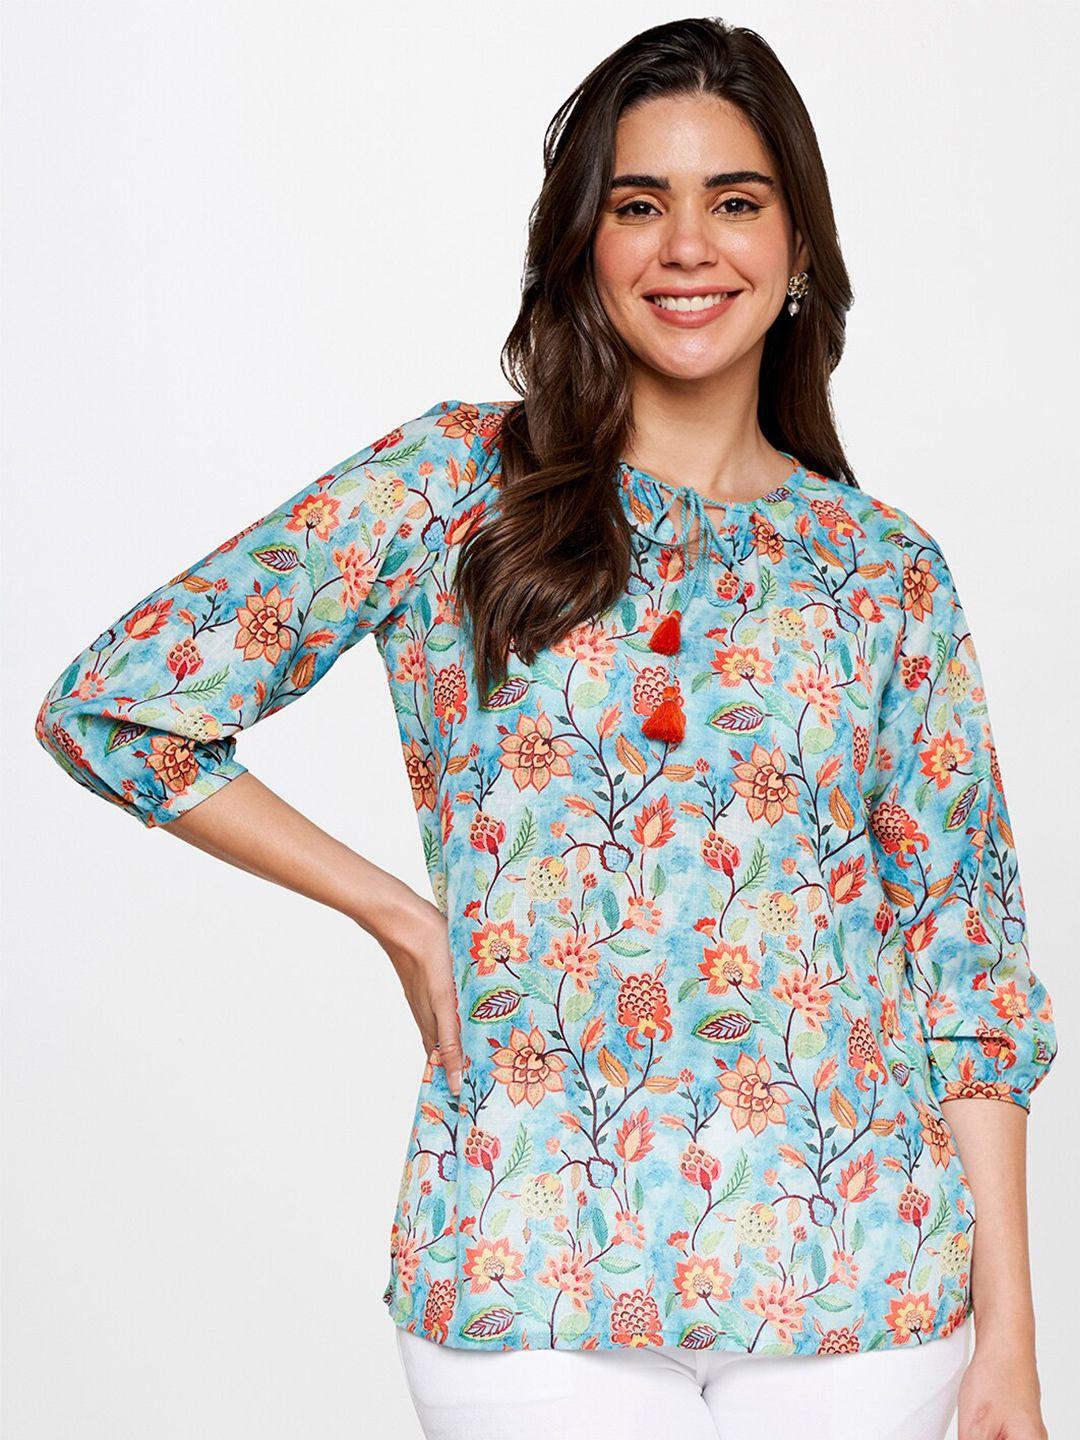 itse floral printed tie-up neck casual top